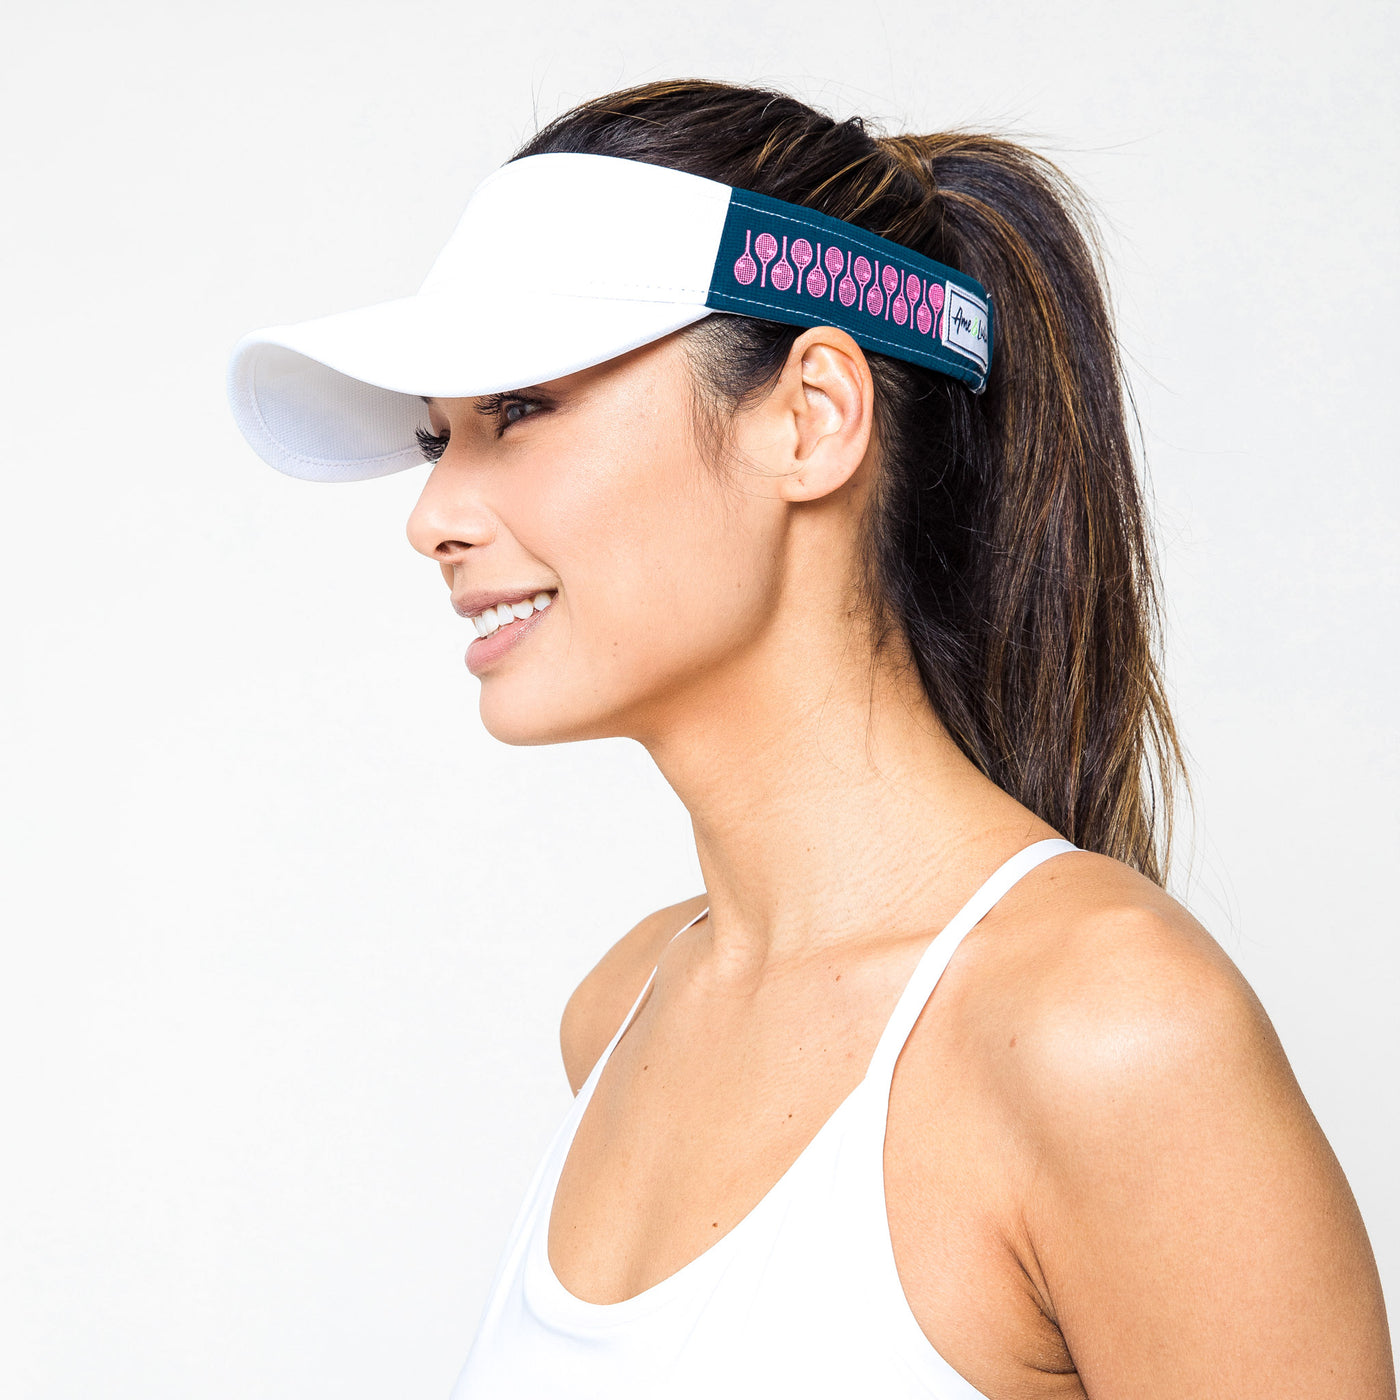 Woman on white background wears Navy Pink Racquets Head in the game visor. Front of visor is white and the sides are navy with hot pink racquets printed on the navy.